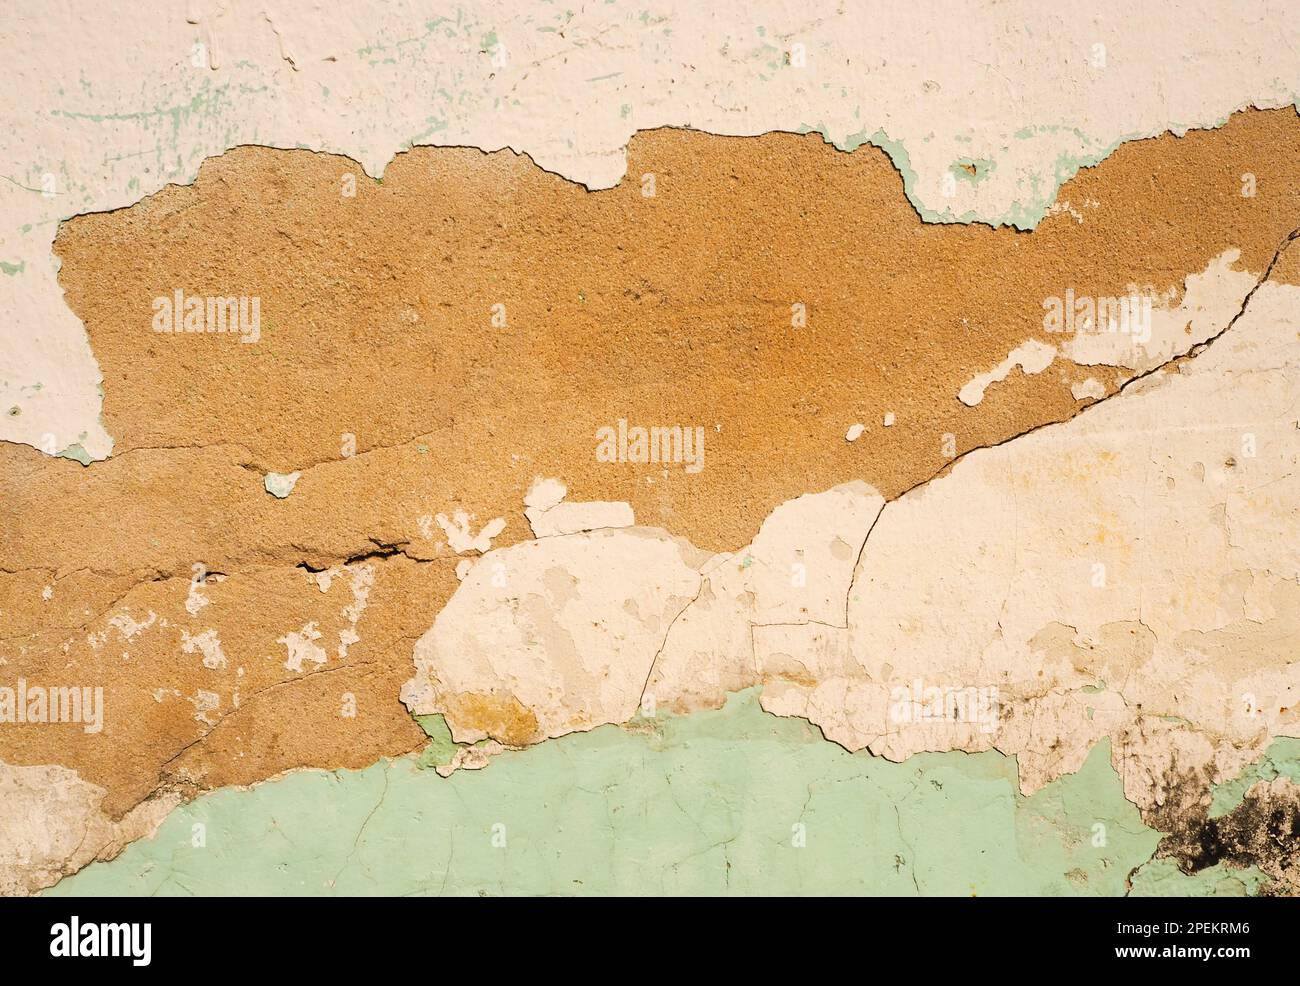 Wall texture of peeled off plaster and paint layers Stock Photo